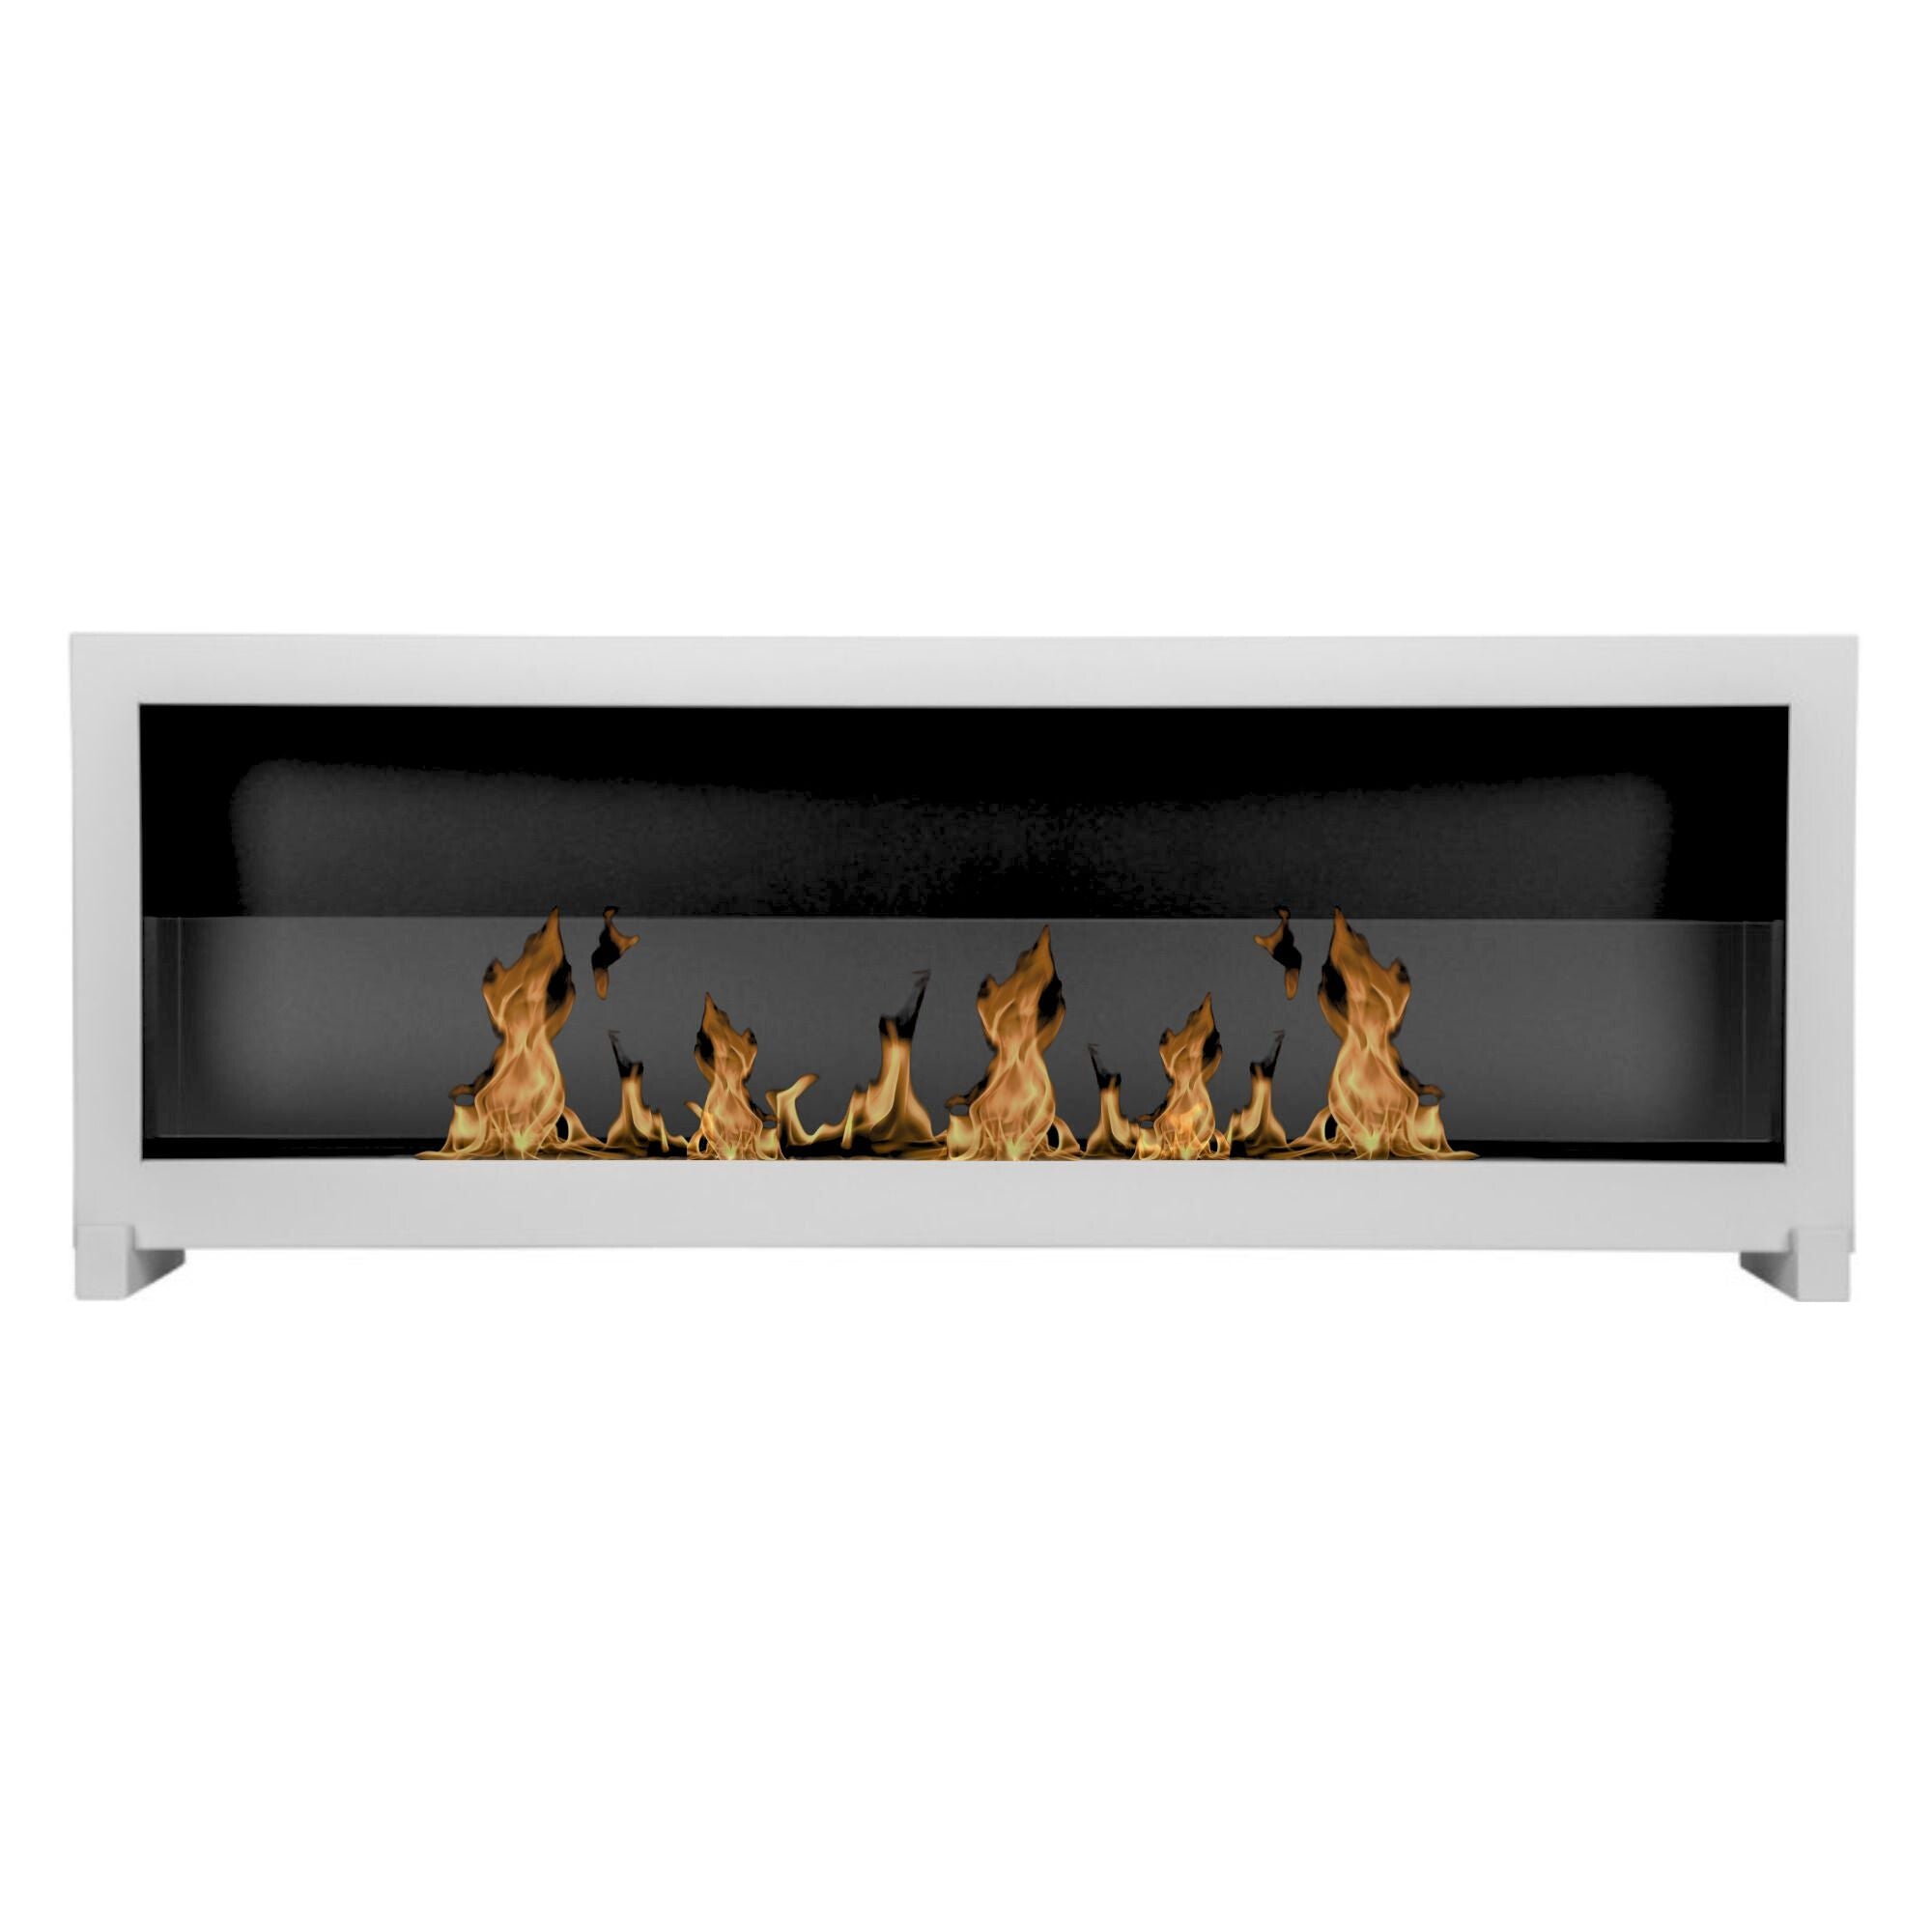 S - Line White Full BOX Wall Fireplace - Freestanding Bio-Ethanol 120 x 40 CM With Glass